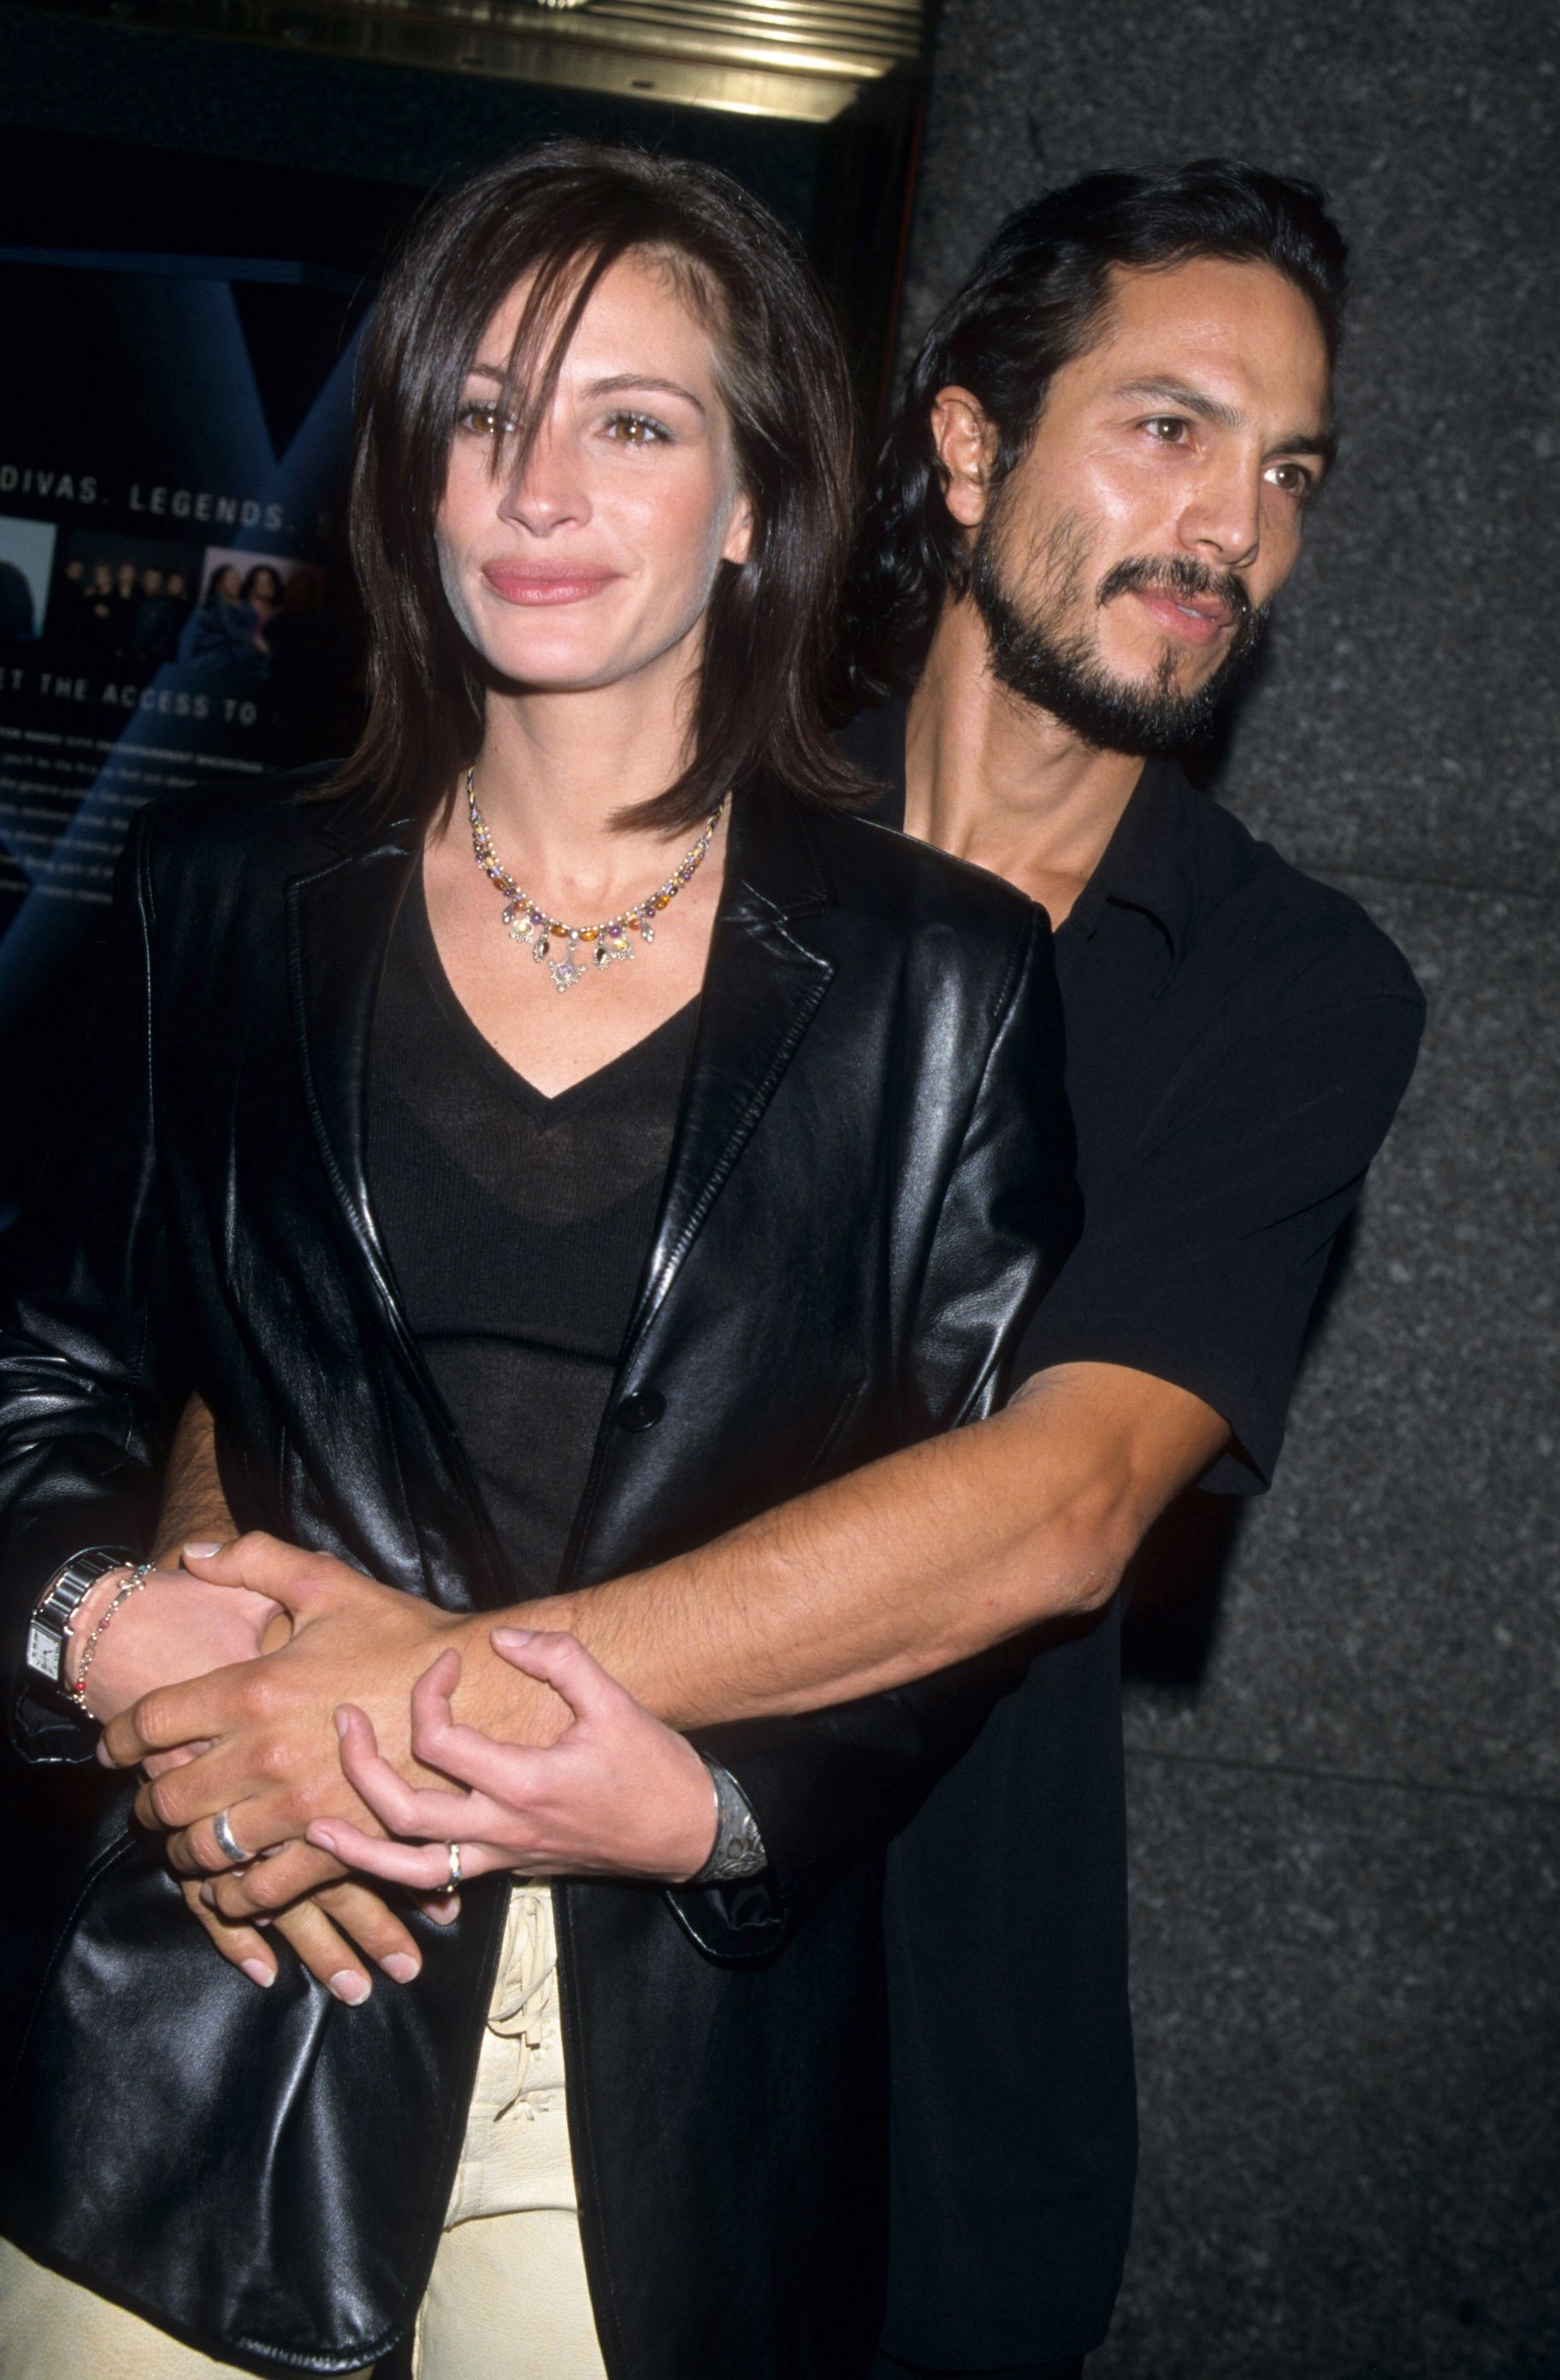 Julia Roberts and Benjamin Bratt during DNC 2000 Fundraiser NY Concert at Radio City Music Hall in New York City, New York, United States. | Source: Getty Images